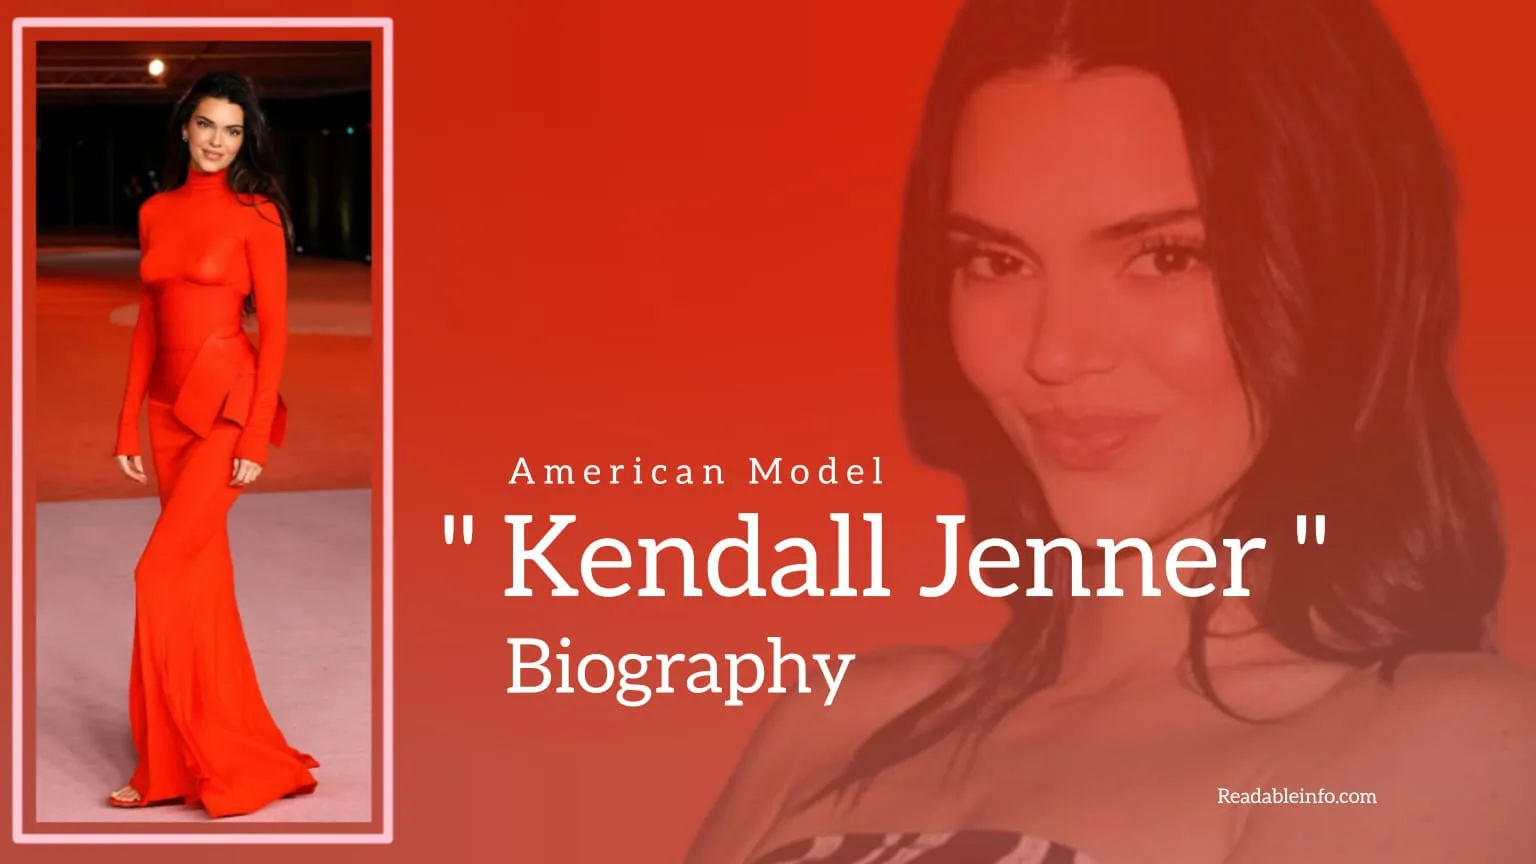 You are currently viewing Kendall Jenner Biography (American Model)